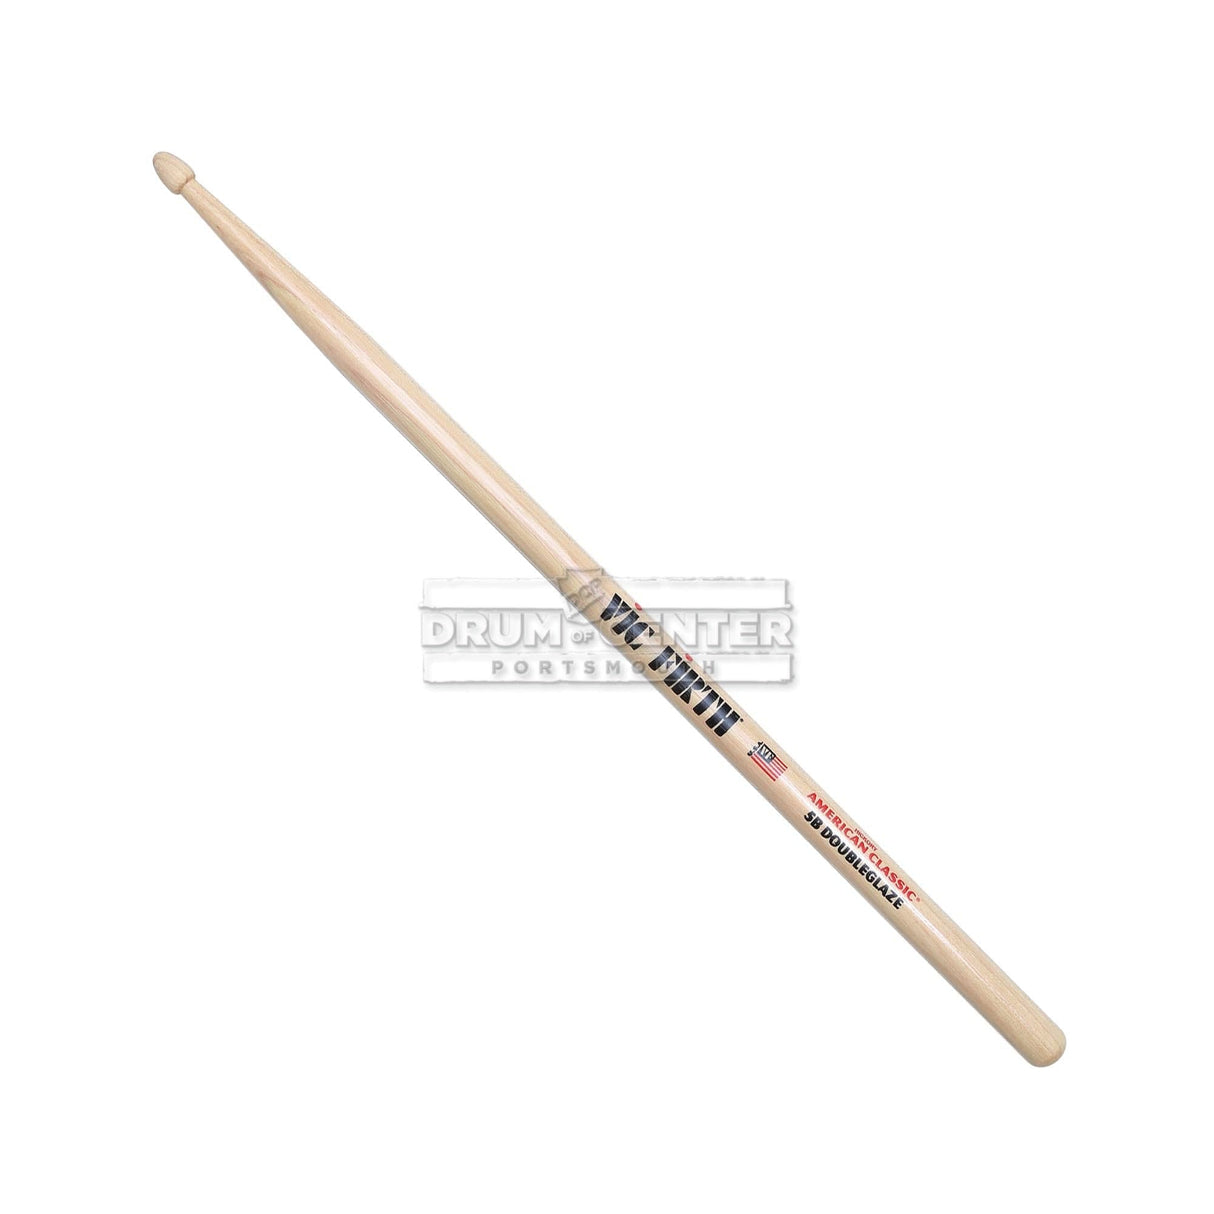 Vic Firth American Classic 5B DoubleGlaze -- Double Coat of Lacquer Finish